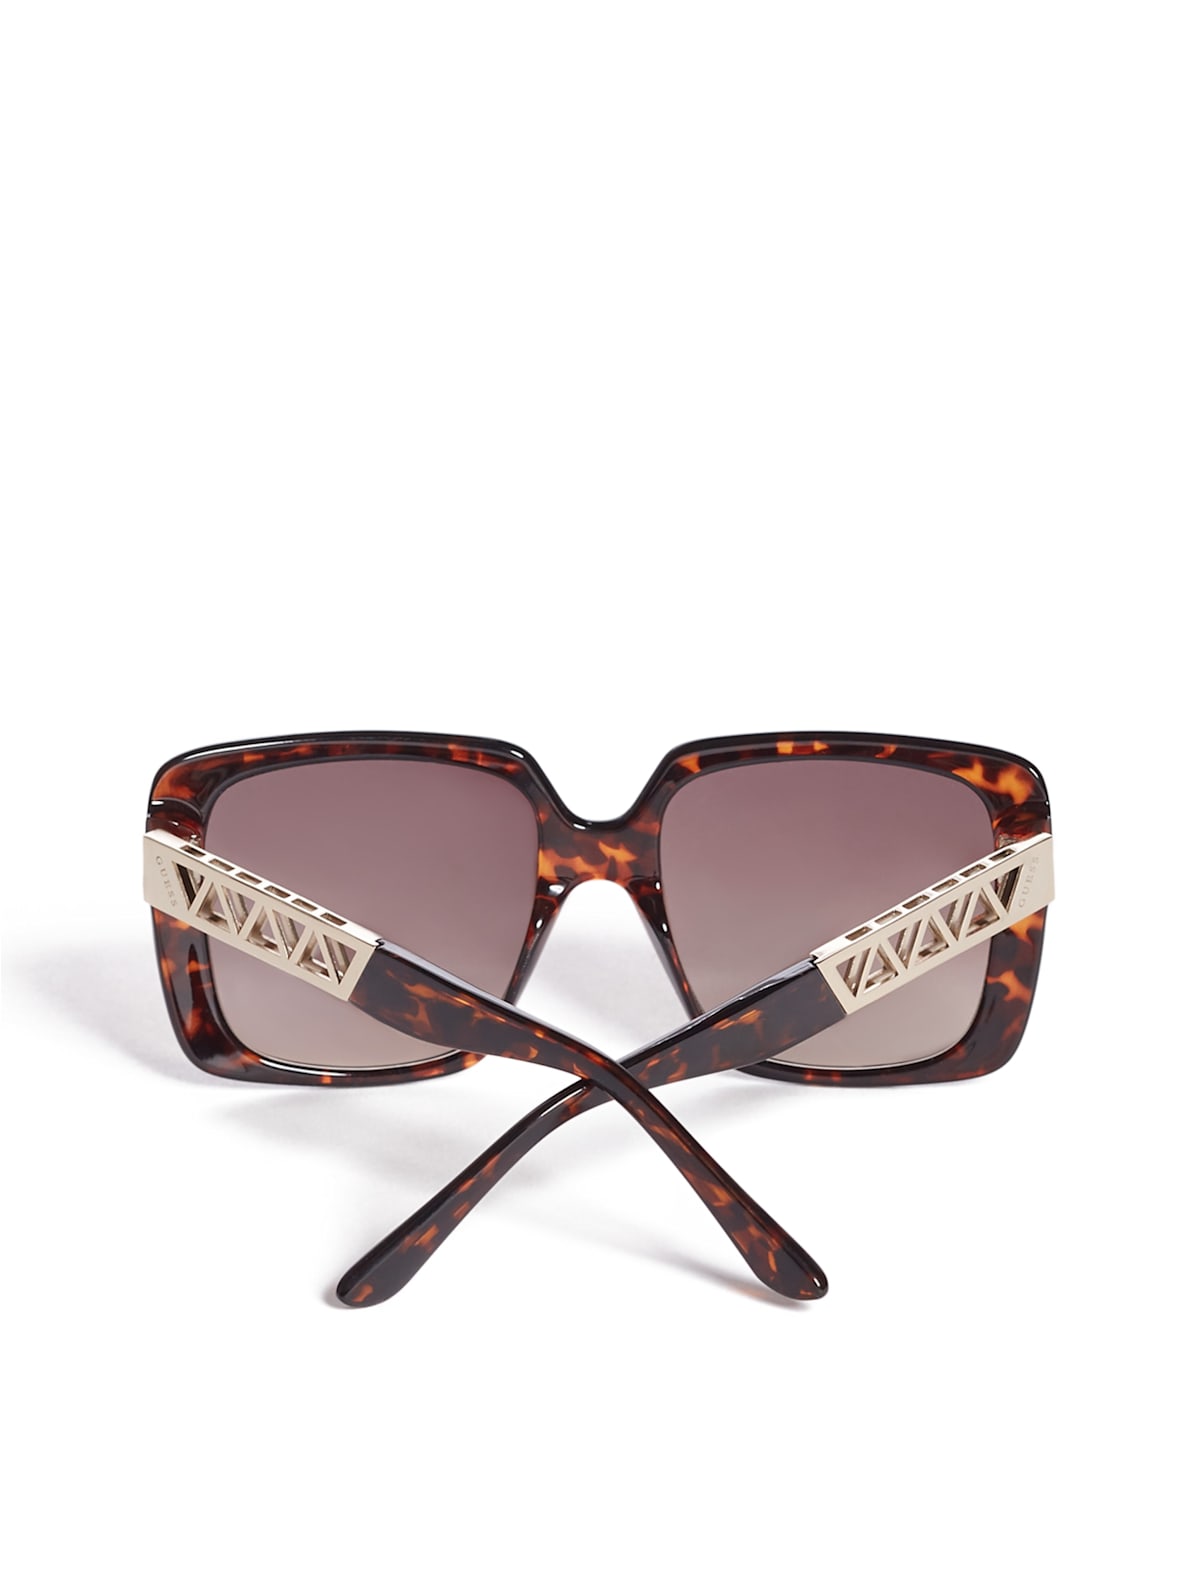 G by GUESS Womens Round Chain Sunglasses 